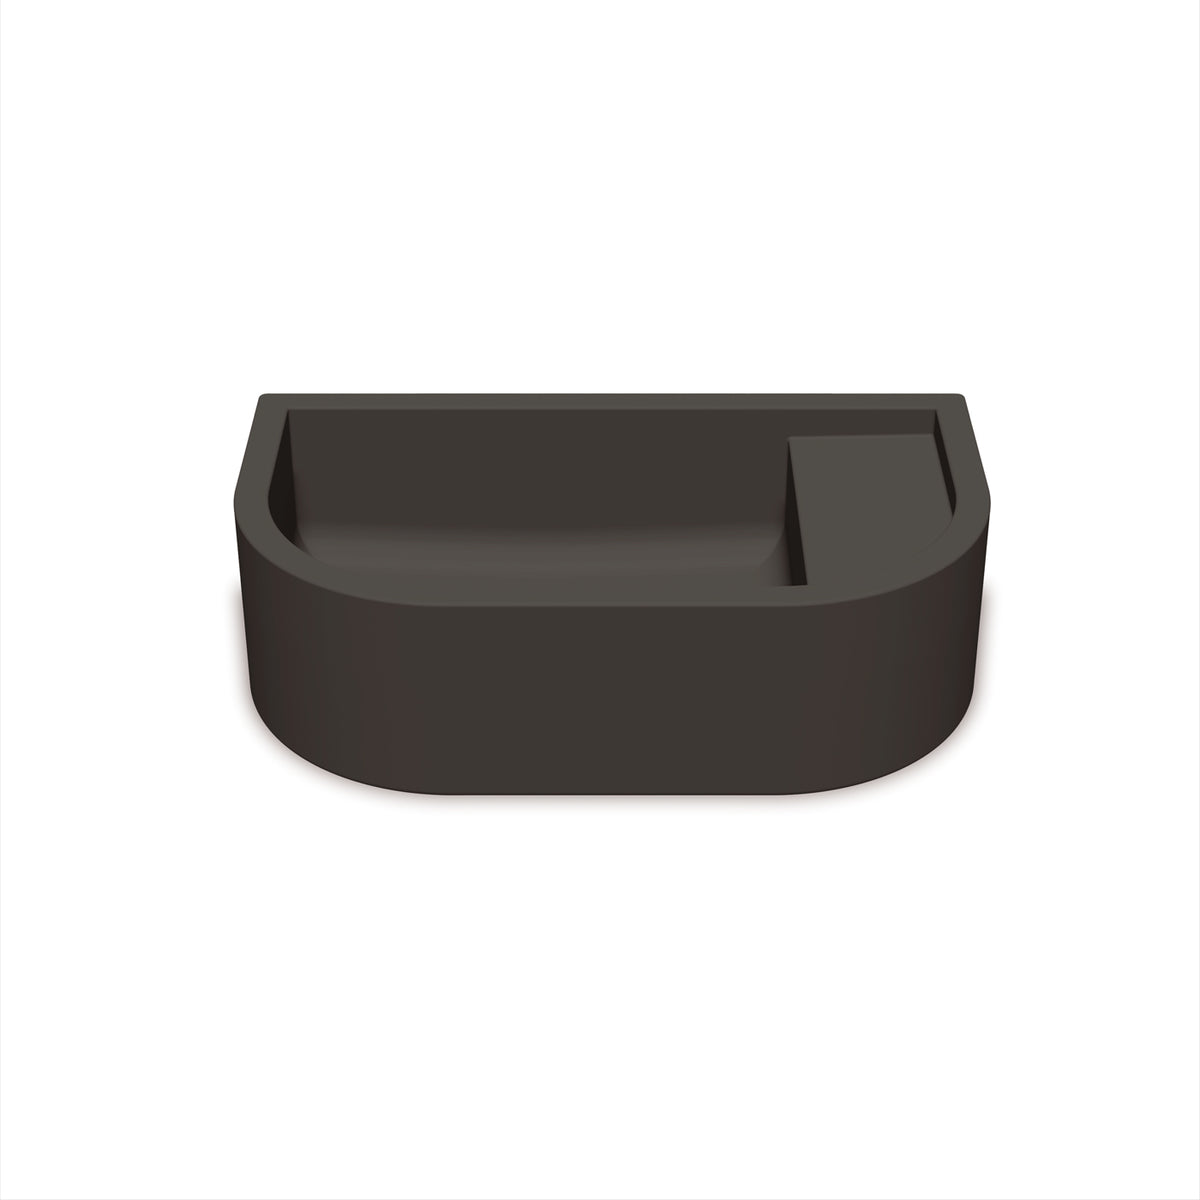 Loop 01 Basin - Overflow - Surface Mount (Charcoal,No Tap Hole,White)